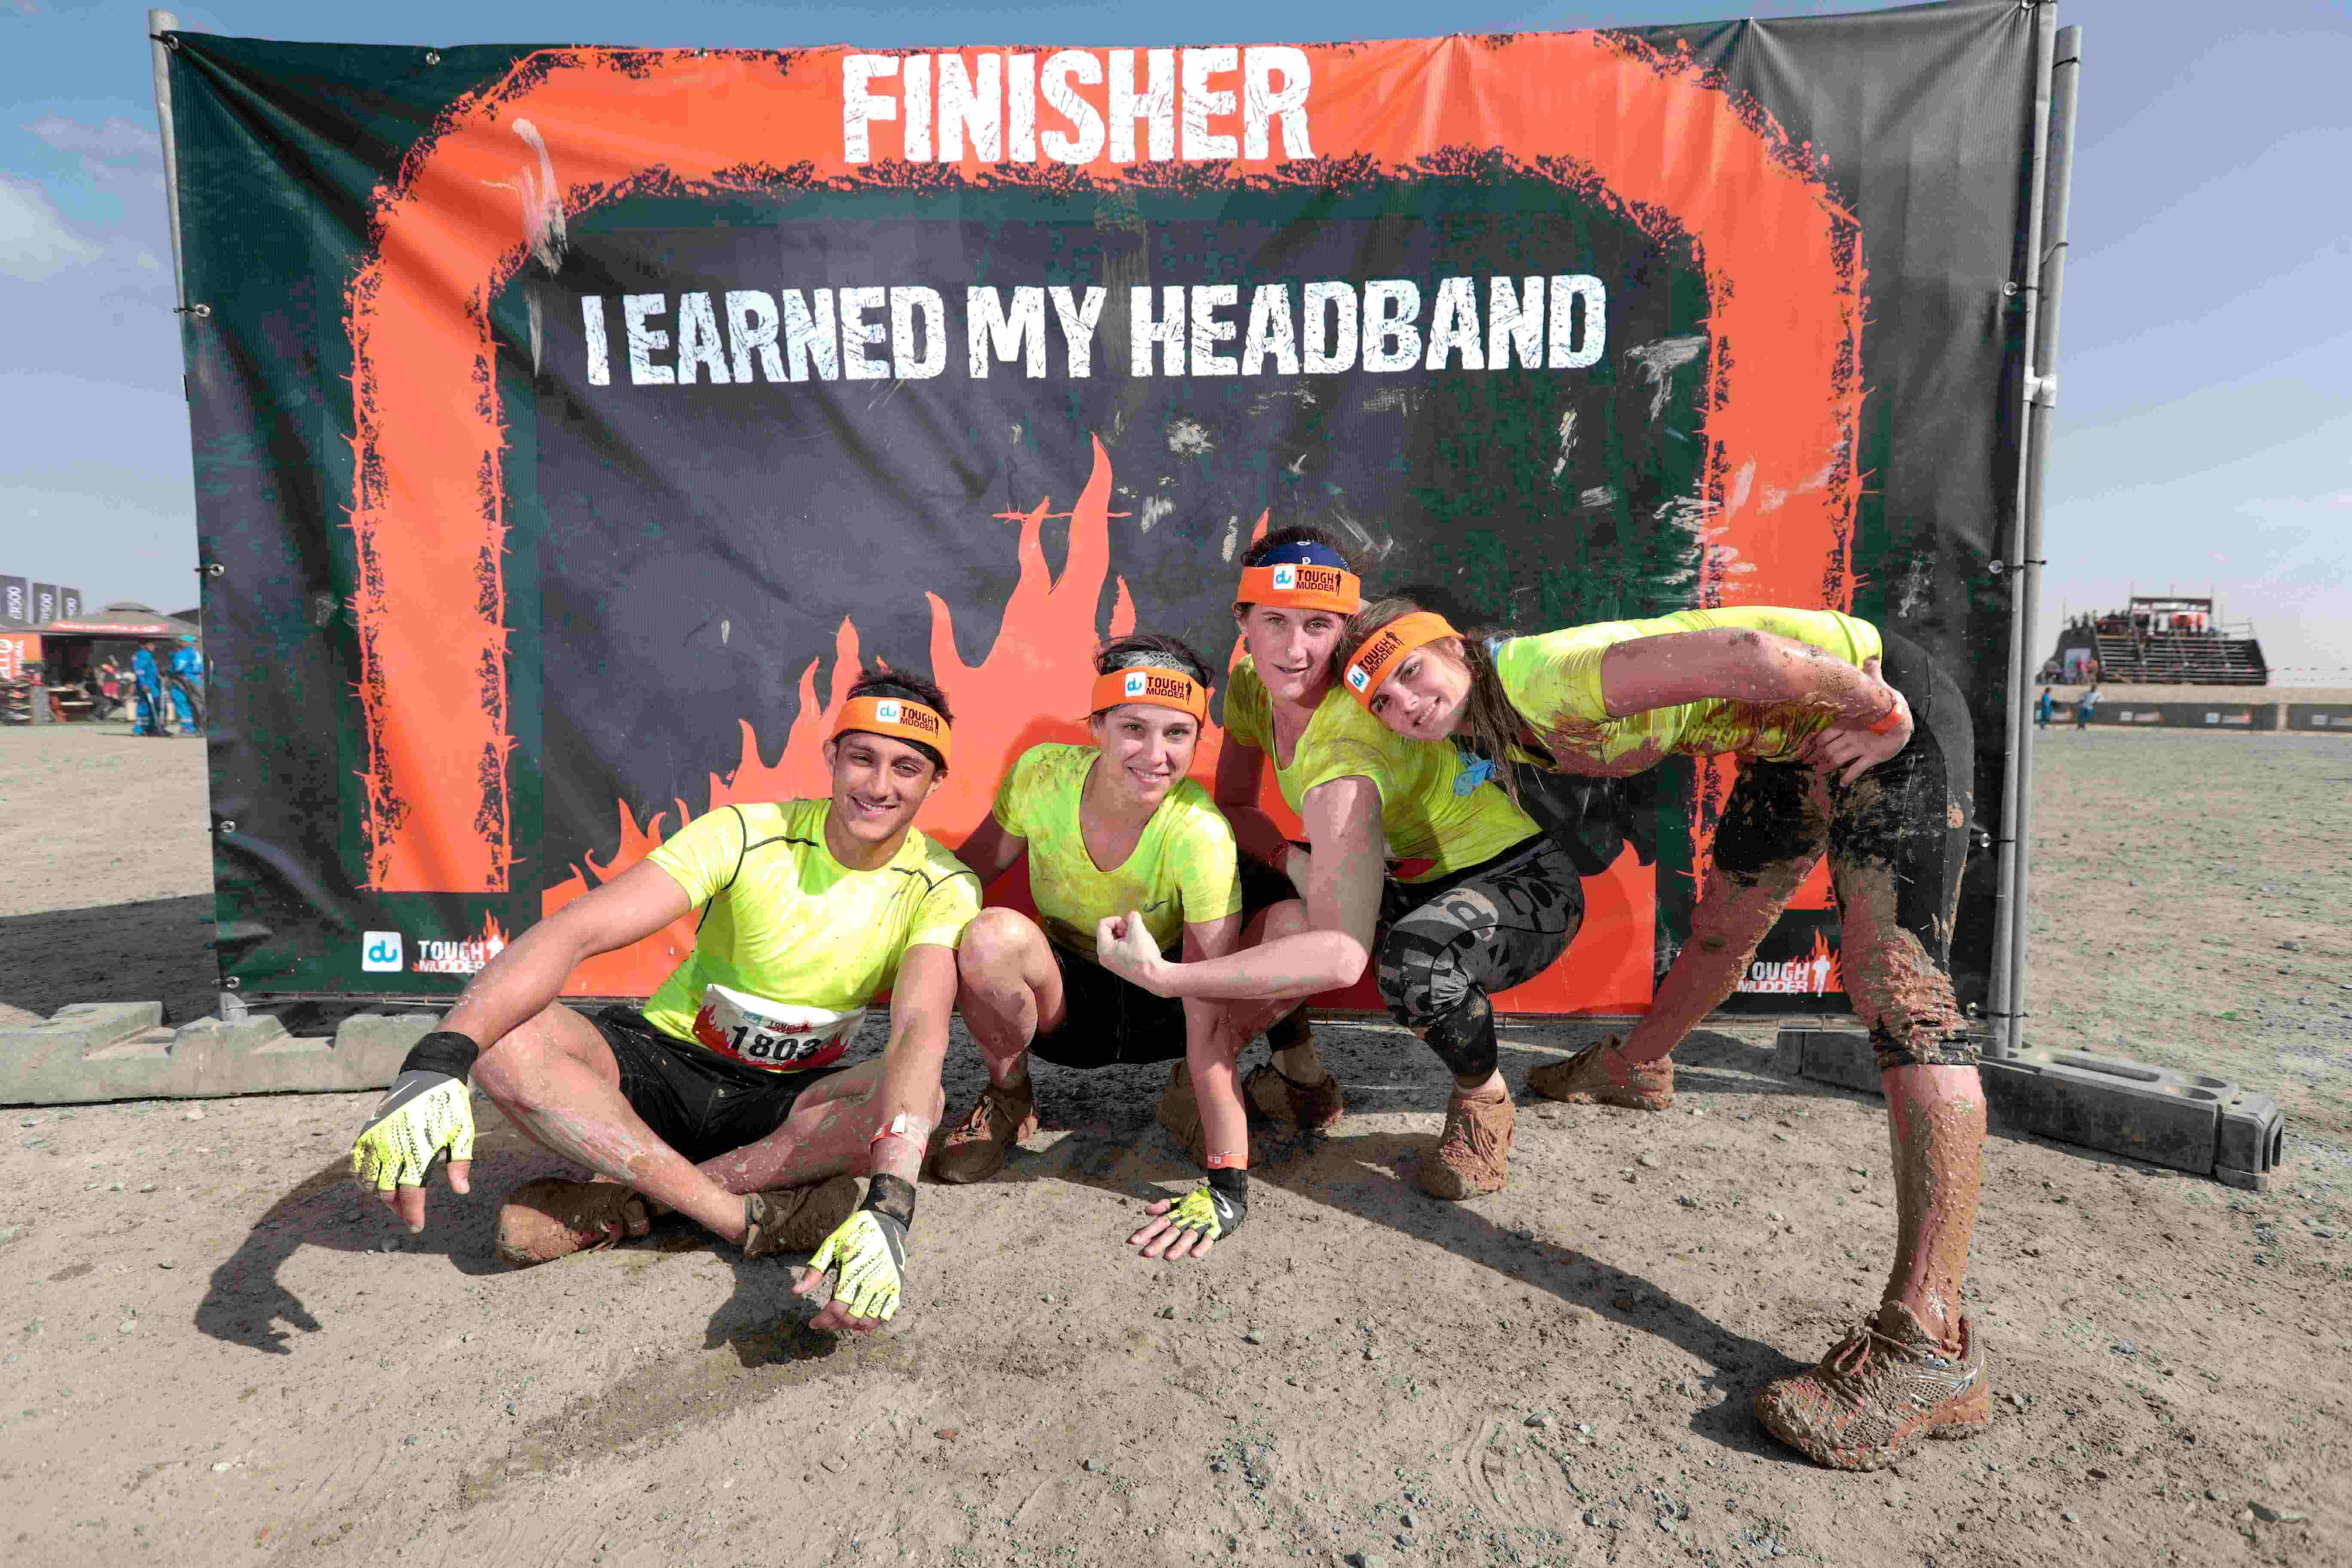 dubai-welcomes-more-than-5000-mudders-to-the-global-community-at-du-tough-mudder-1